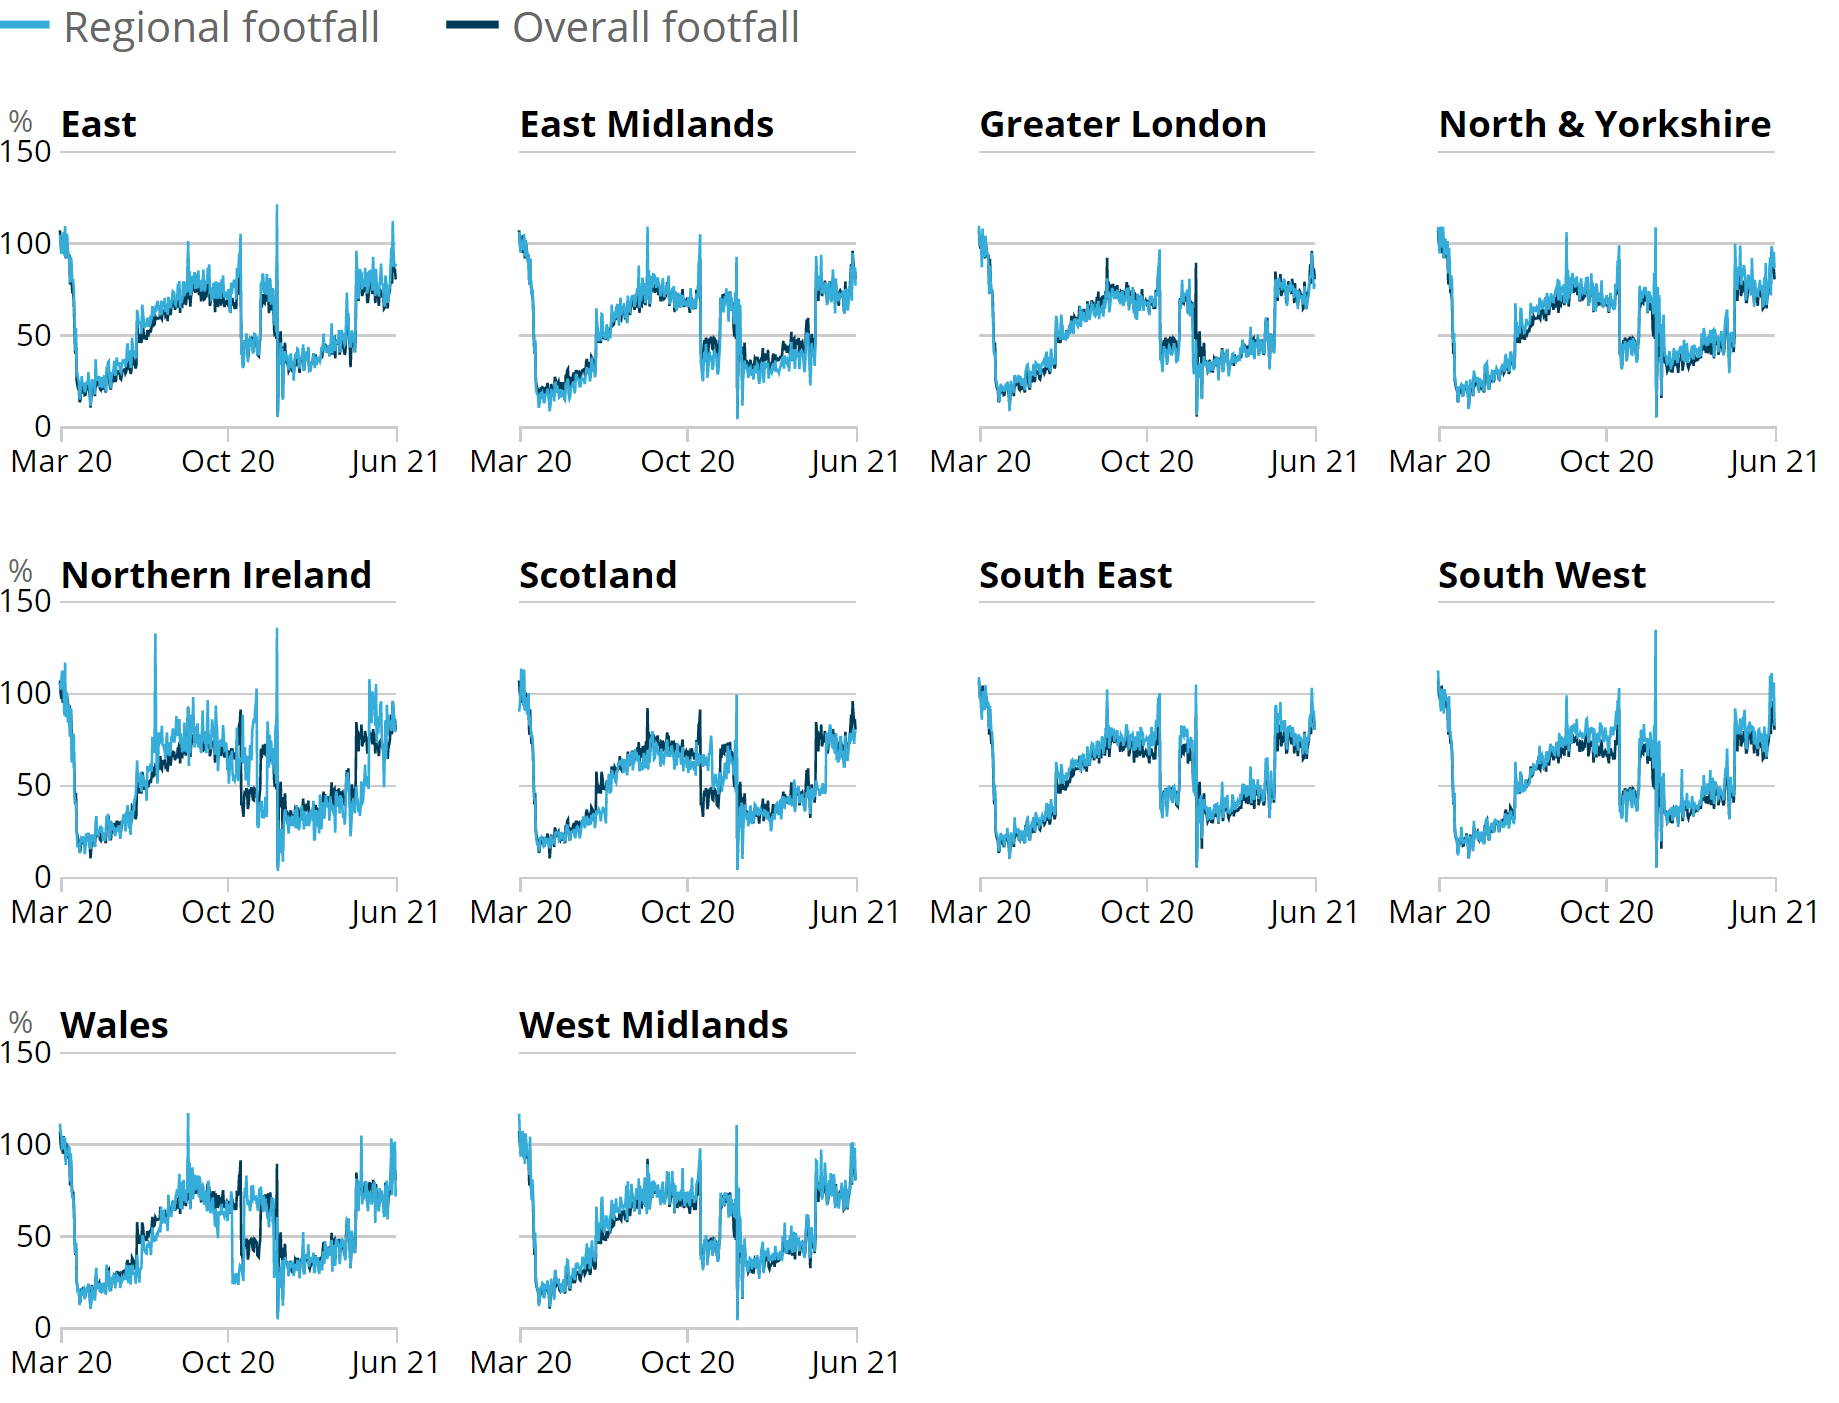 Line chart showing in the week to 5 June 2021, retail footfall was strongest in South West England compared with other UK regions, at 98% of its level in the equivalent week of 2019.